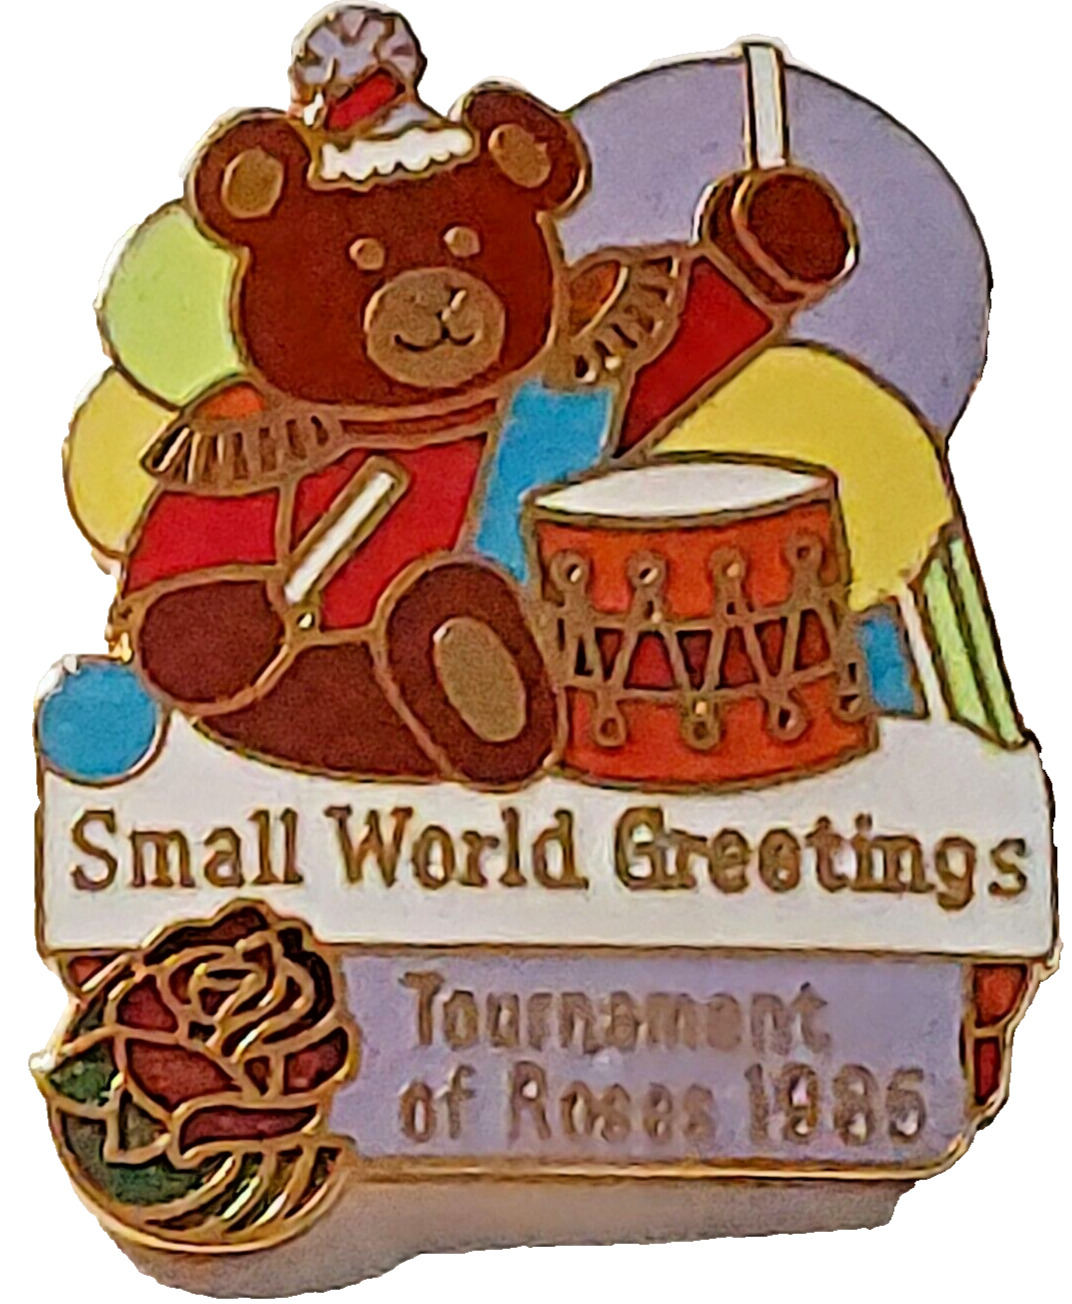 Rose Parade 1986 Small World Greetings 97th Tournament of Roses Lapel Pin